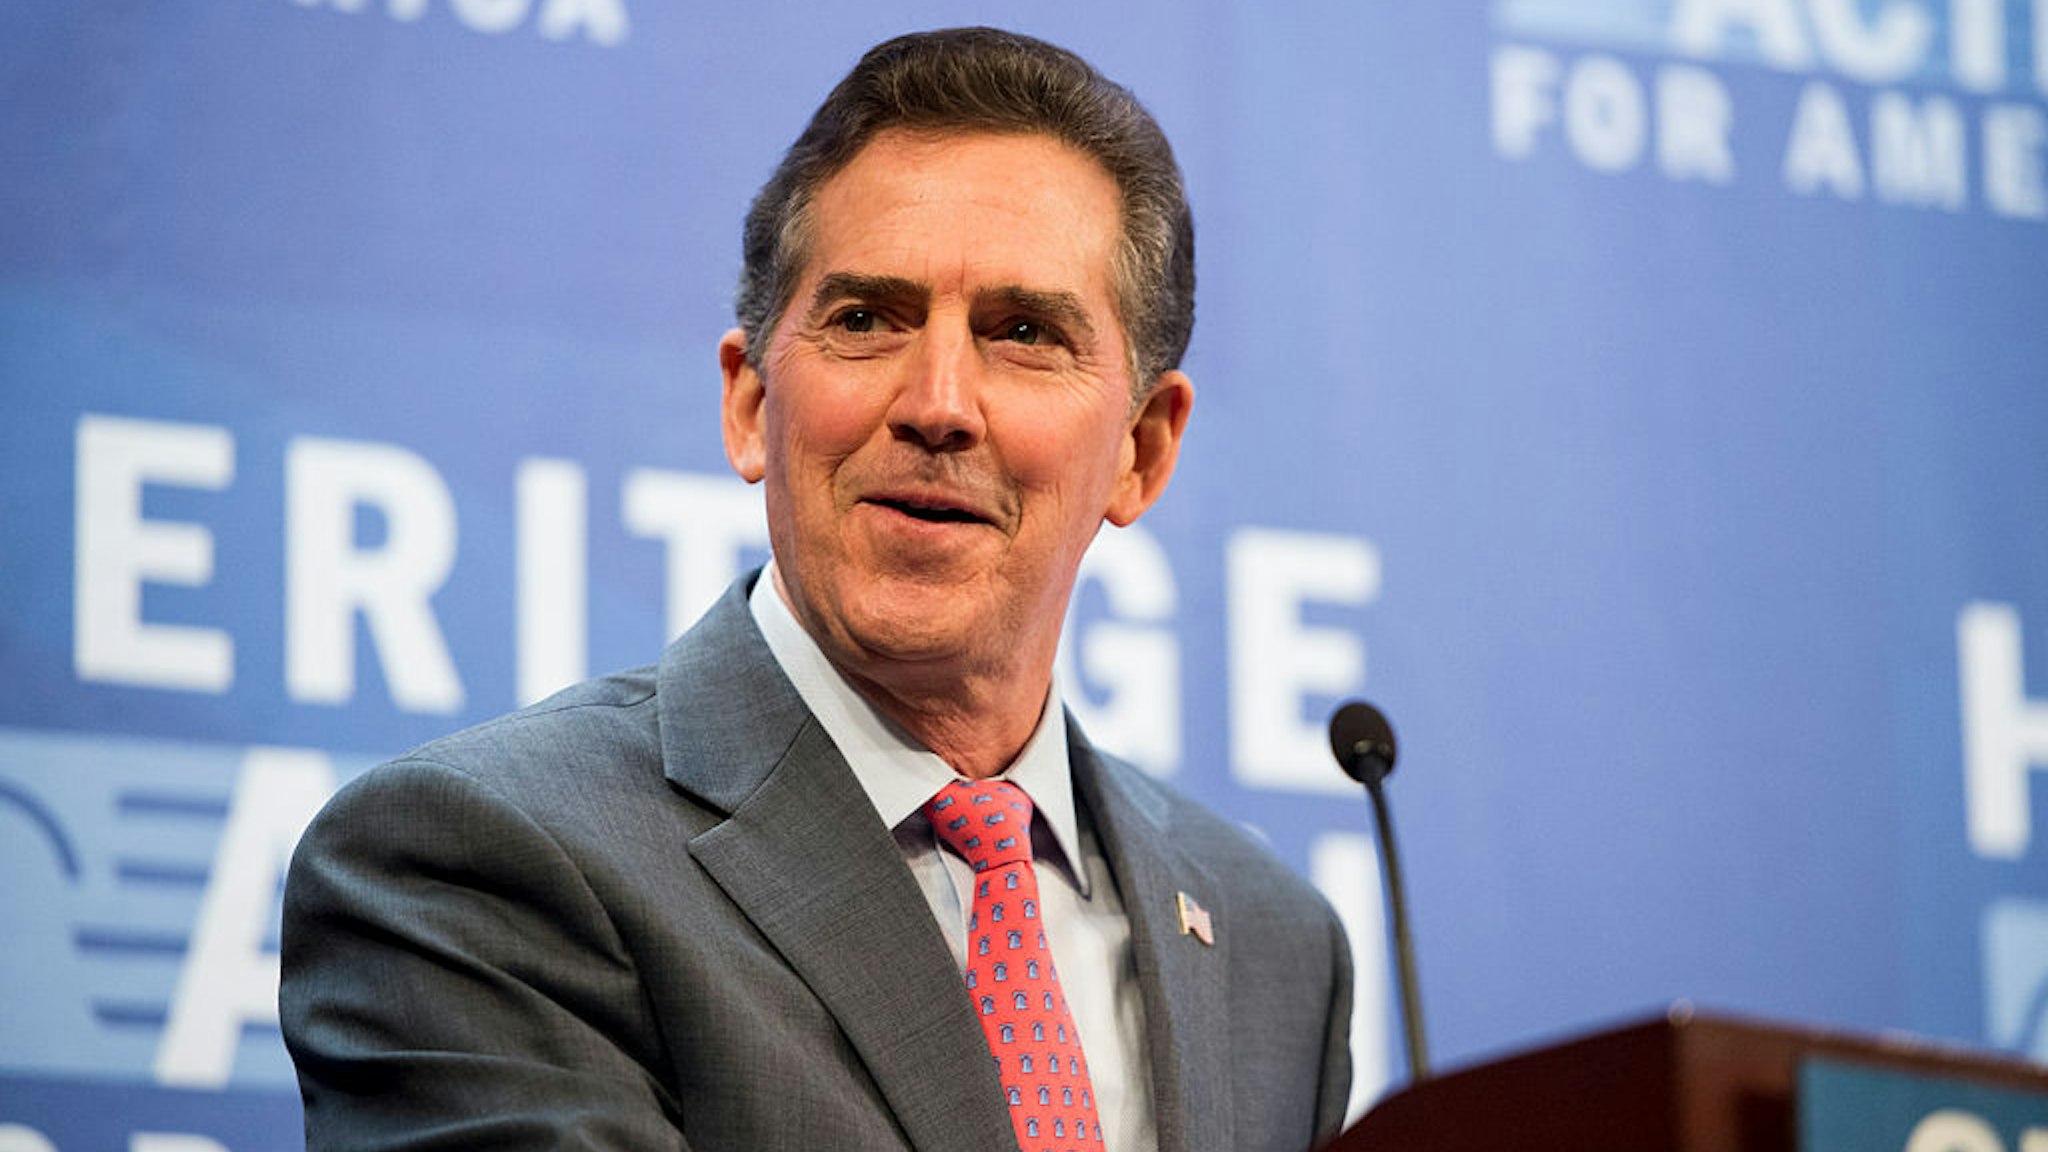 Jim DeMint delivers opening remarks during the Heritage Action for America's second annual Conservative Policy Summit